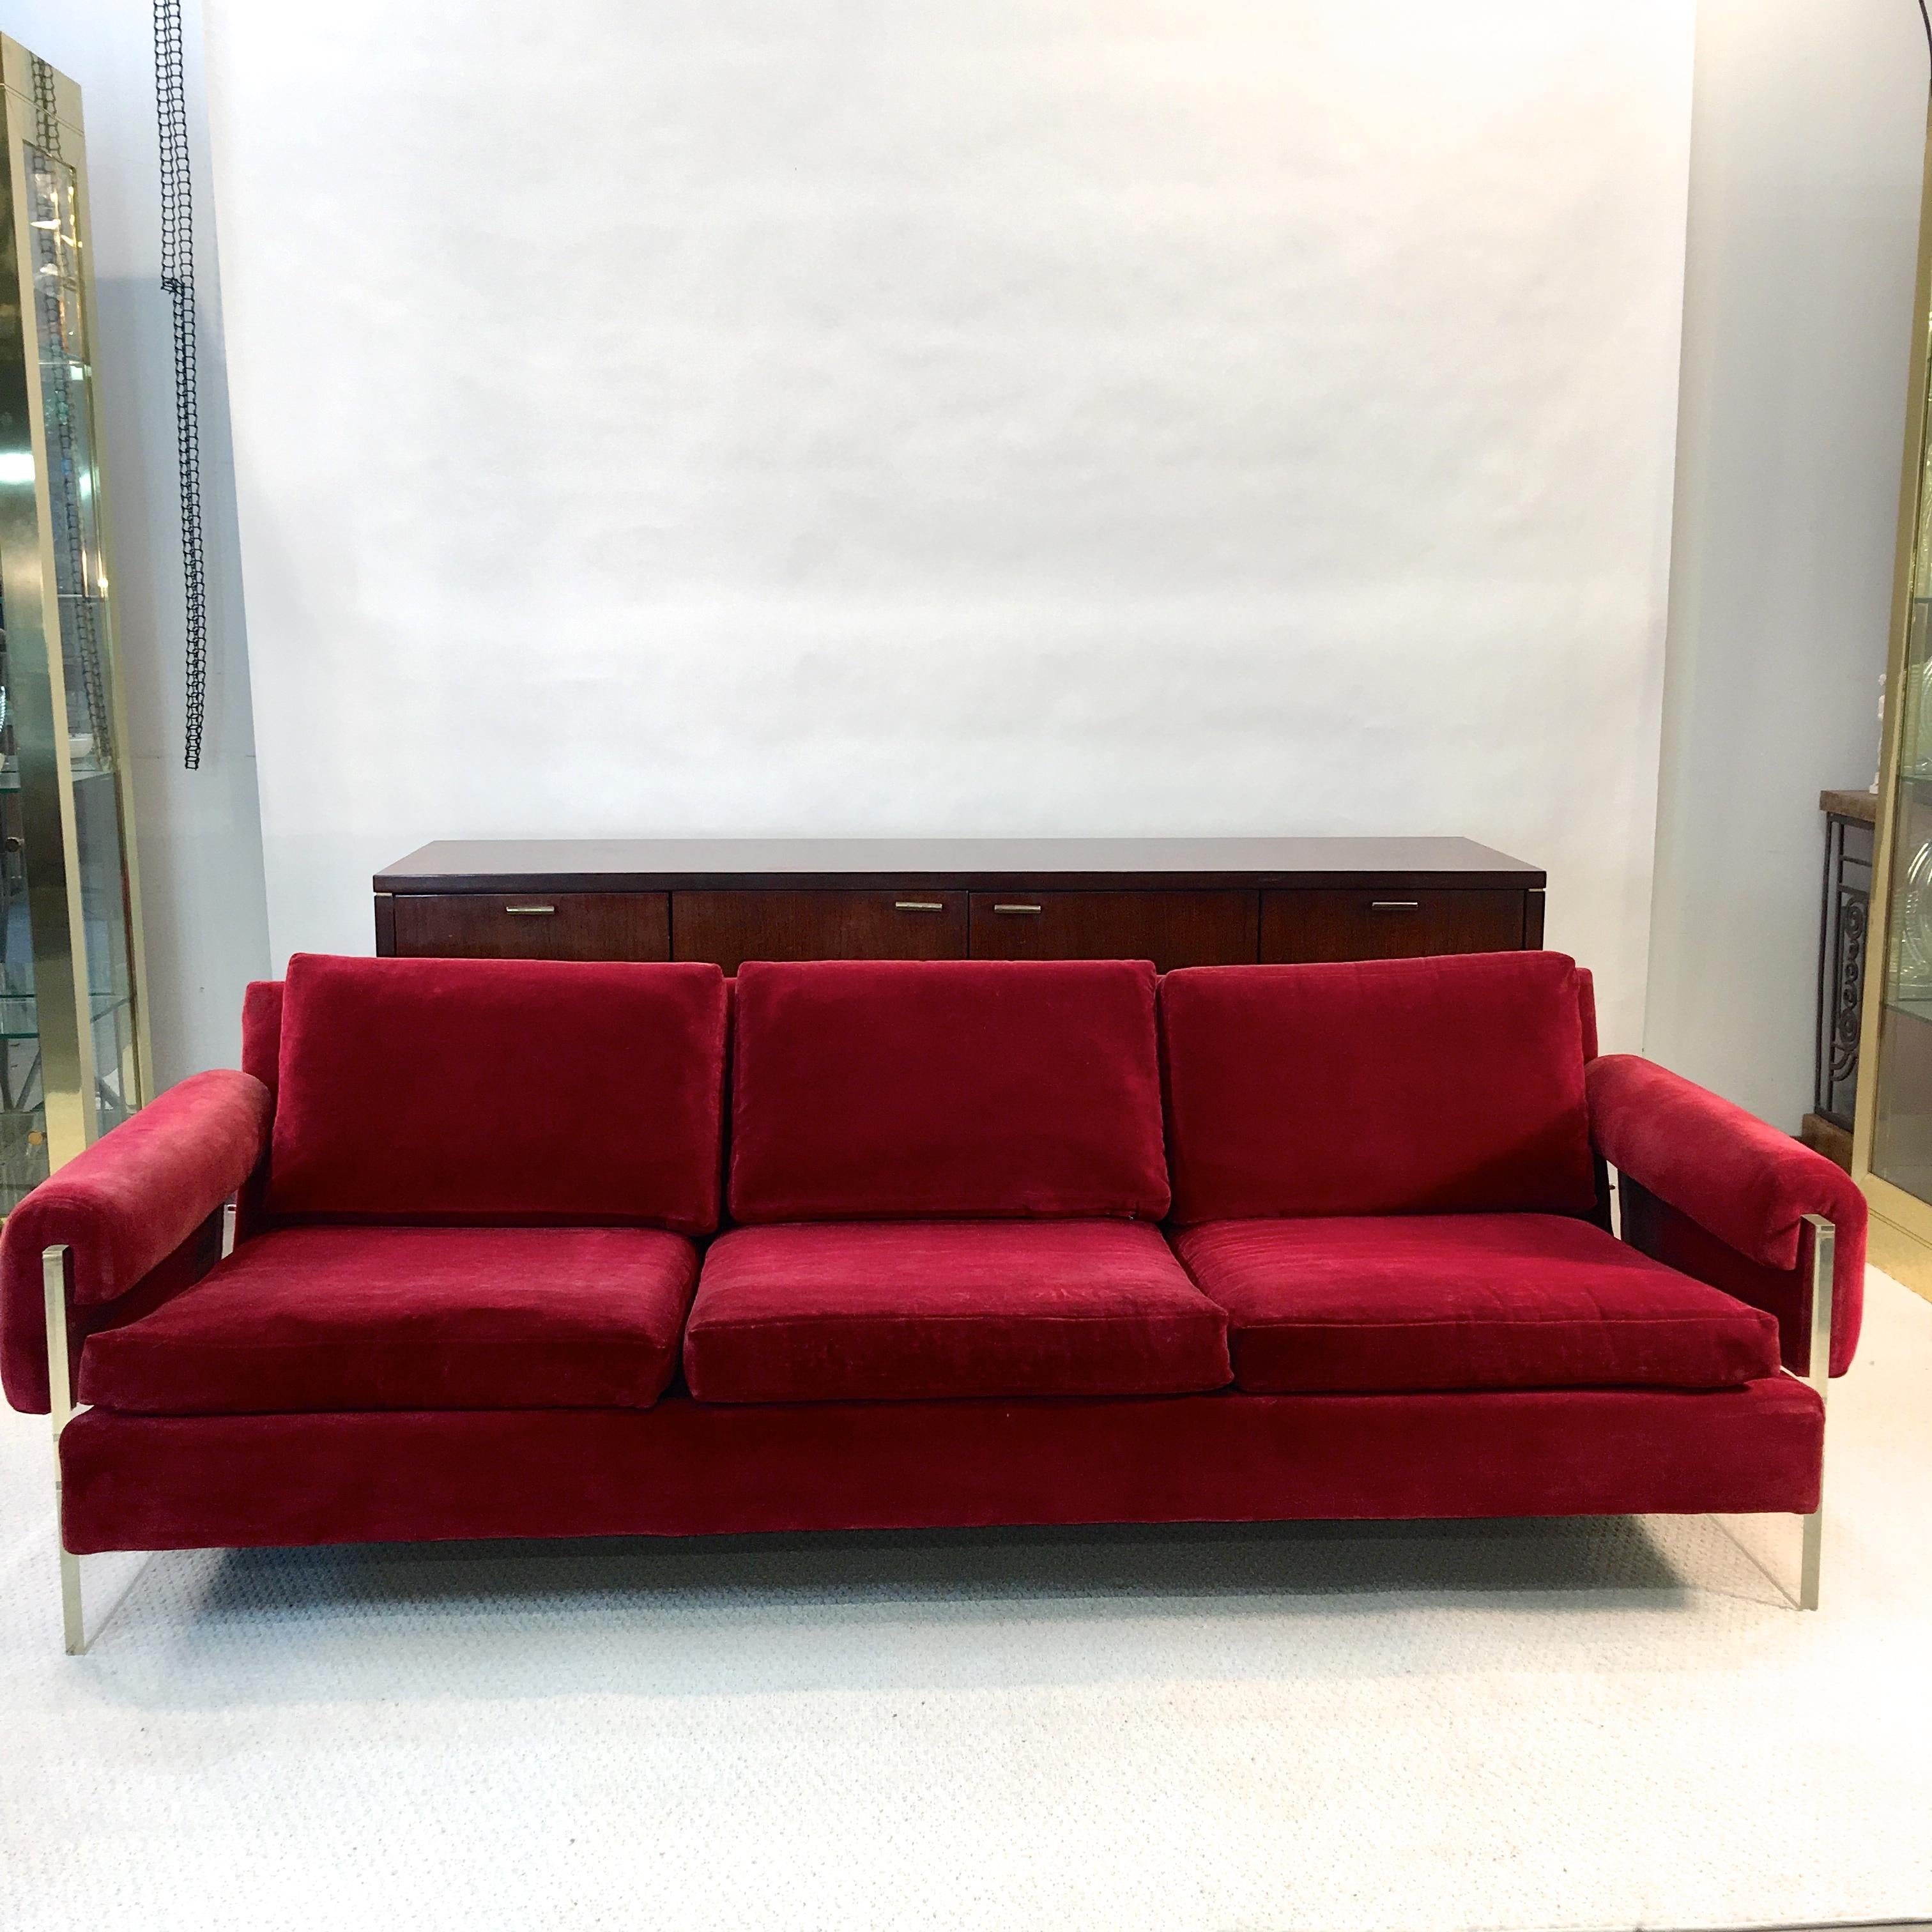 Late 20th Century Lucite Sided Sofa by Milo Baughman for Thayer Coggin